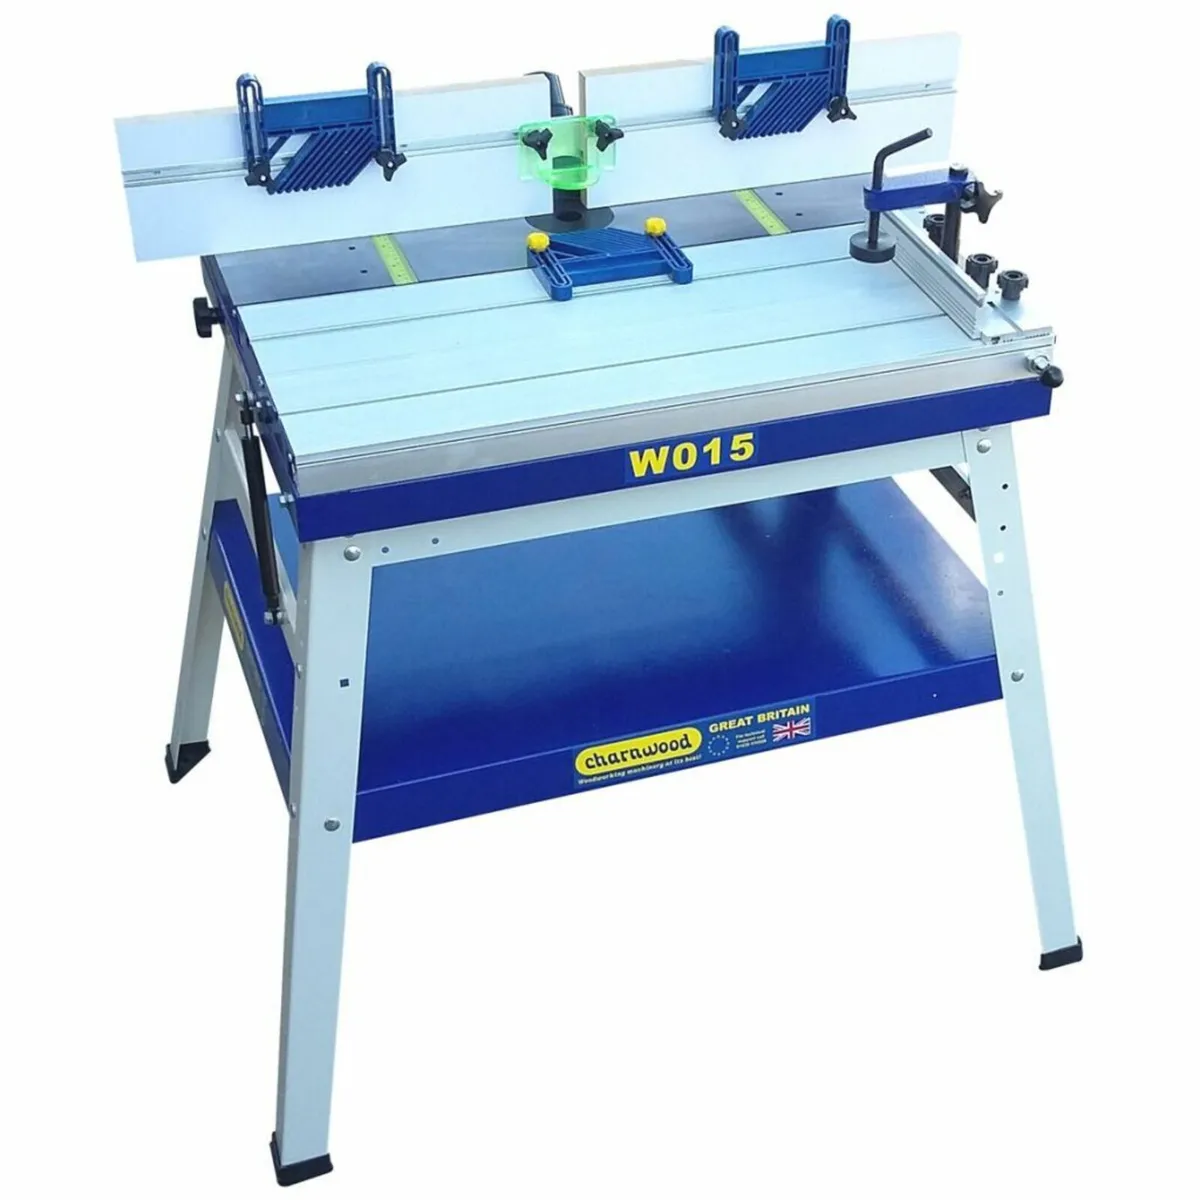 Charnwood W015 Floor Standing Router Table